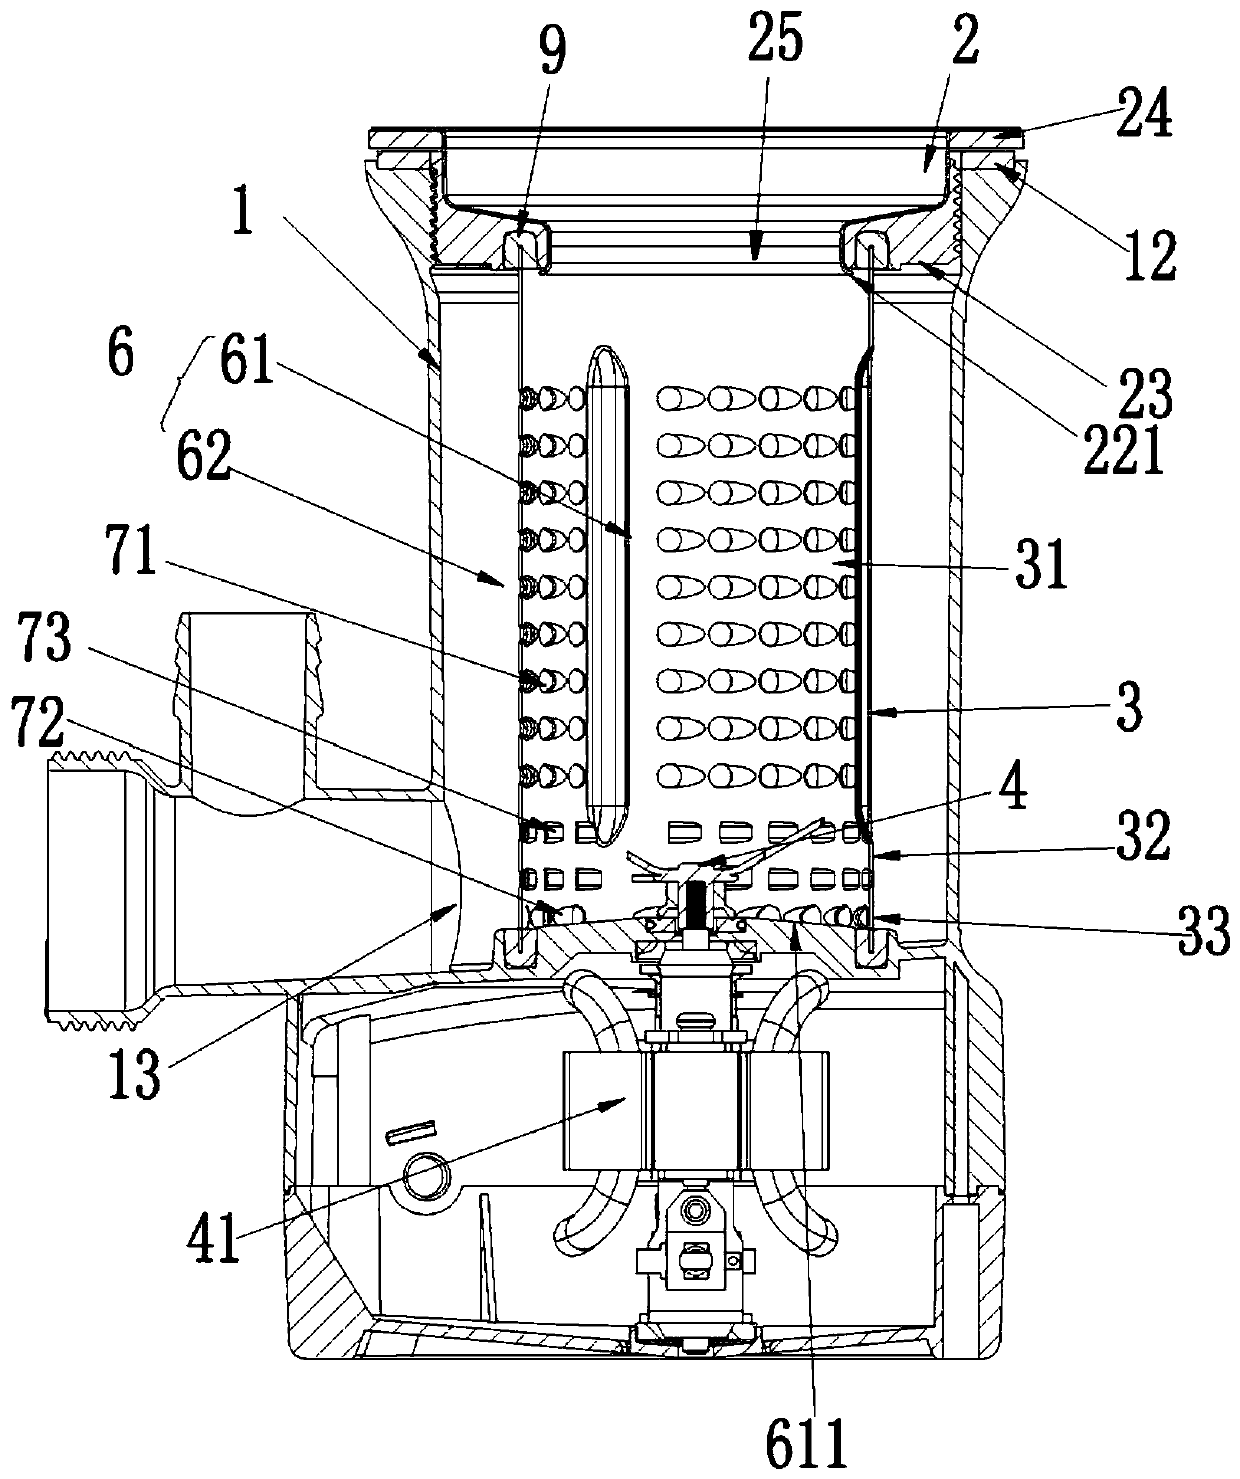 Residue processing device